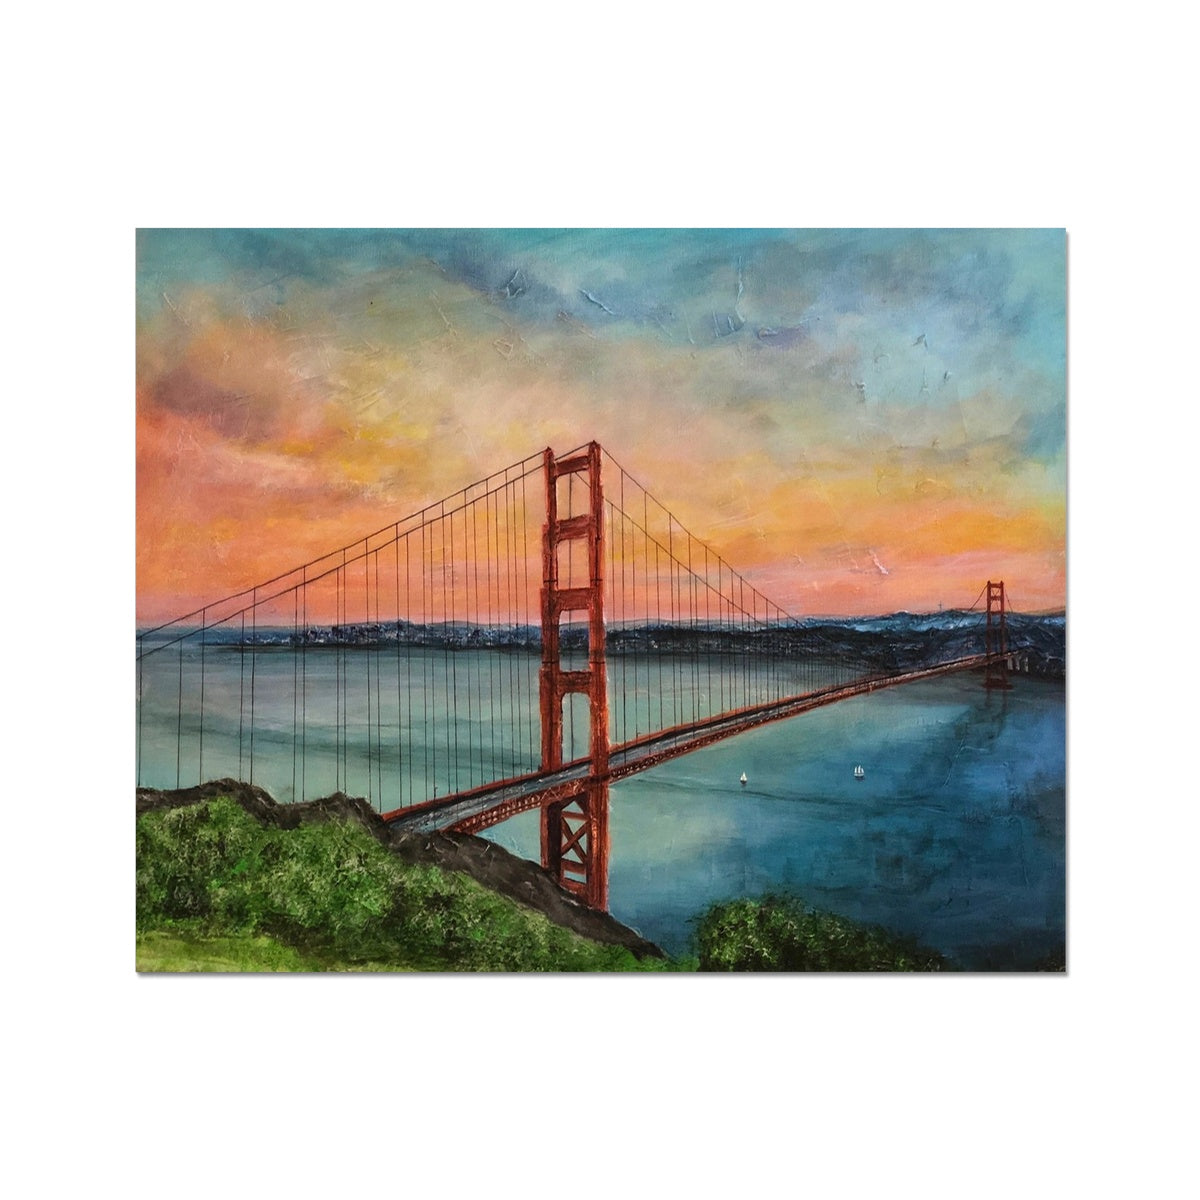 The Golden Gate Bridge Painting | Artist Proof Collector Prints From Scotland-Artist Proof Collector Prints-World Art Gallery-20"x16"-Paintings, Prints, Homeware, Art Gifts From Scotland By Scottish Artist Kevin Hunter